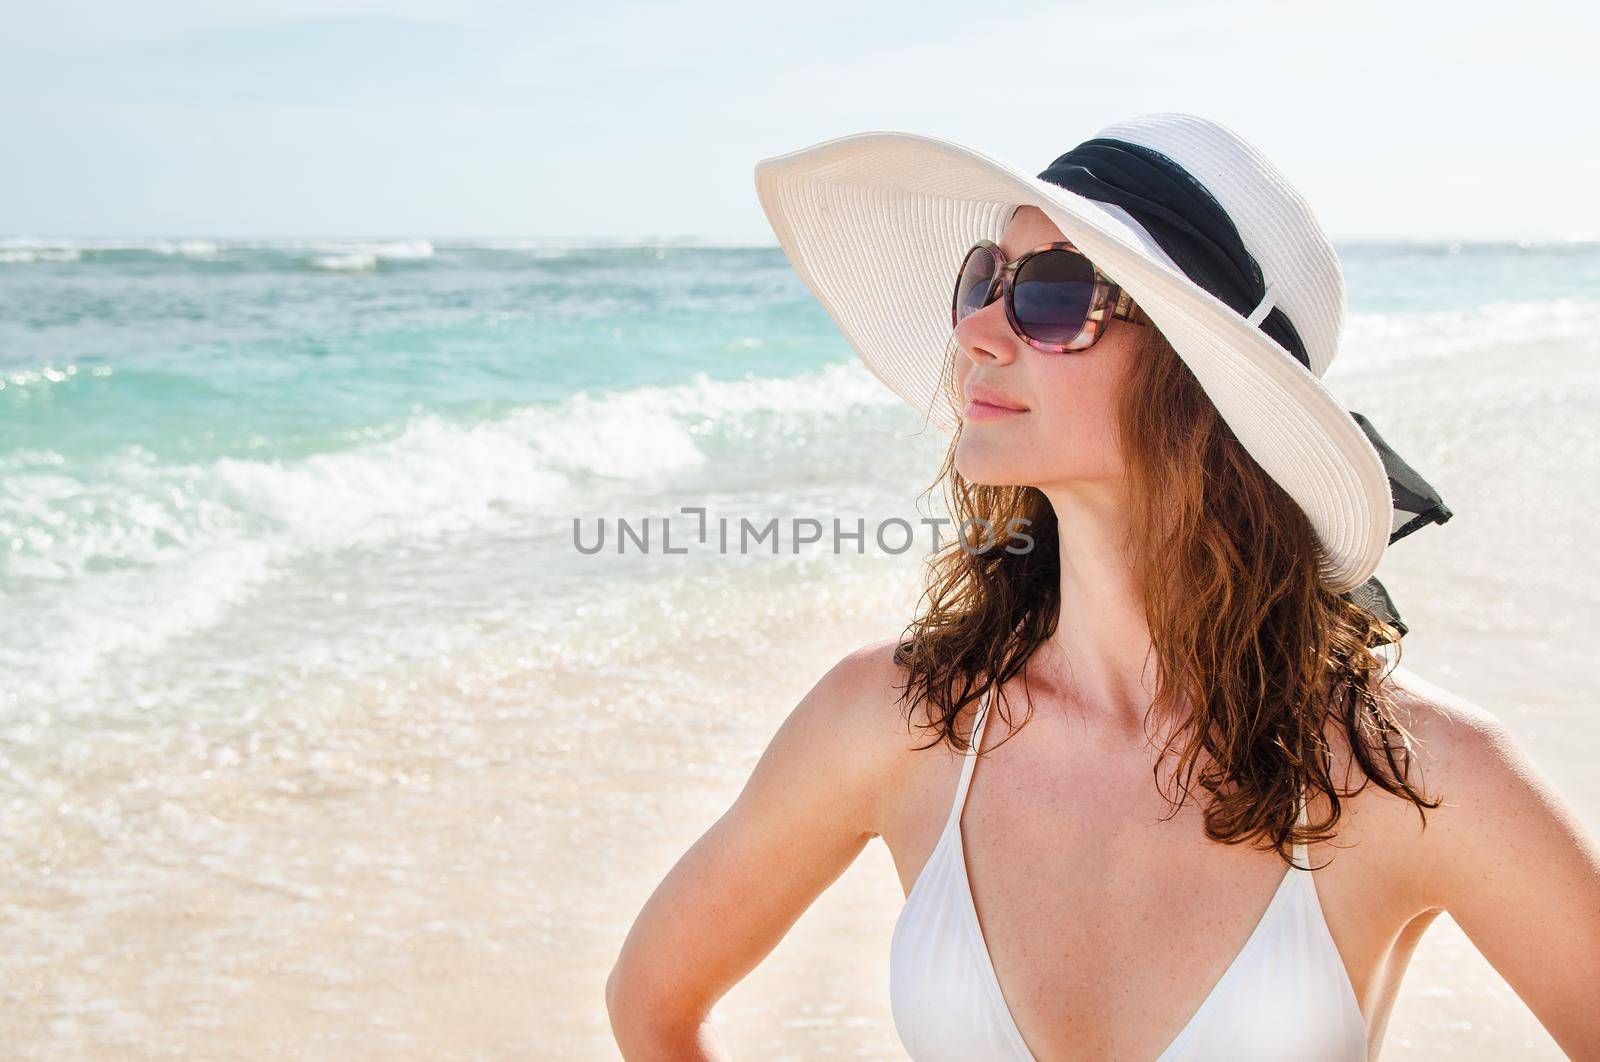 Young woman on beach - Stock image by Jyliana